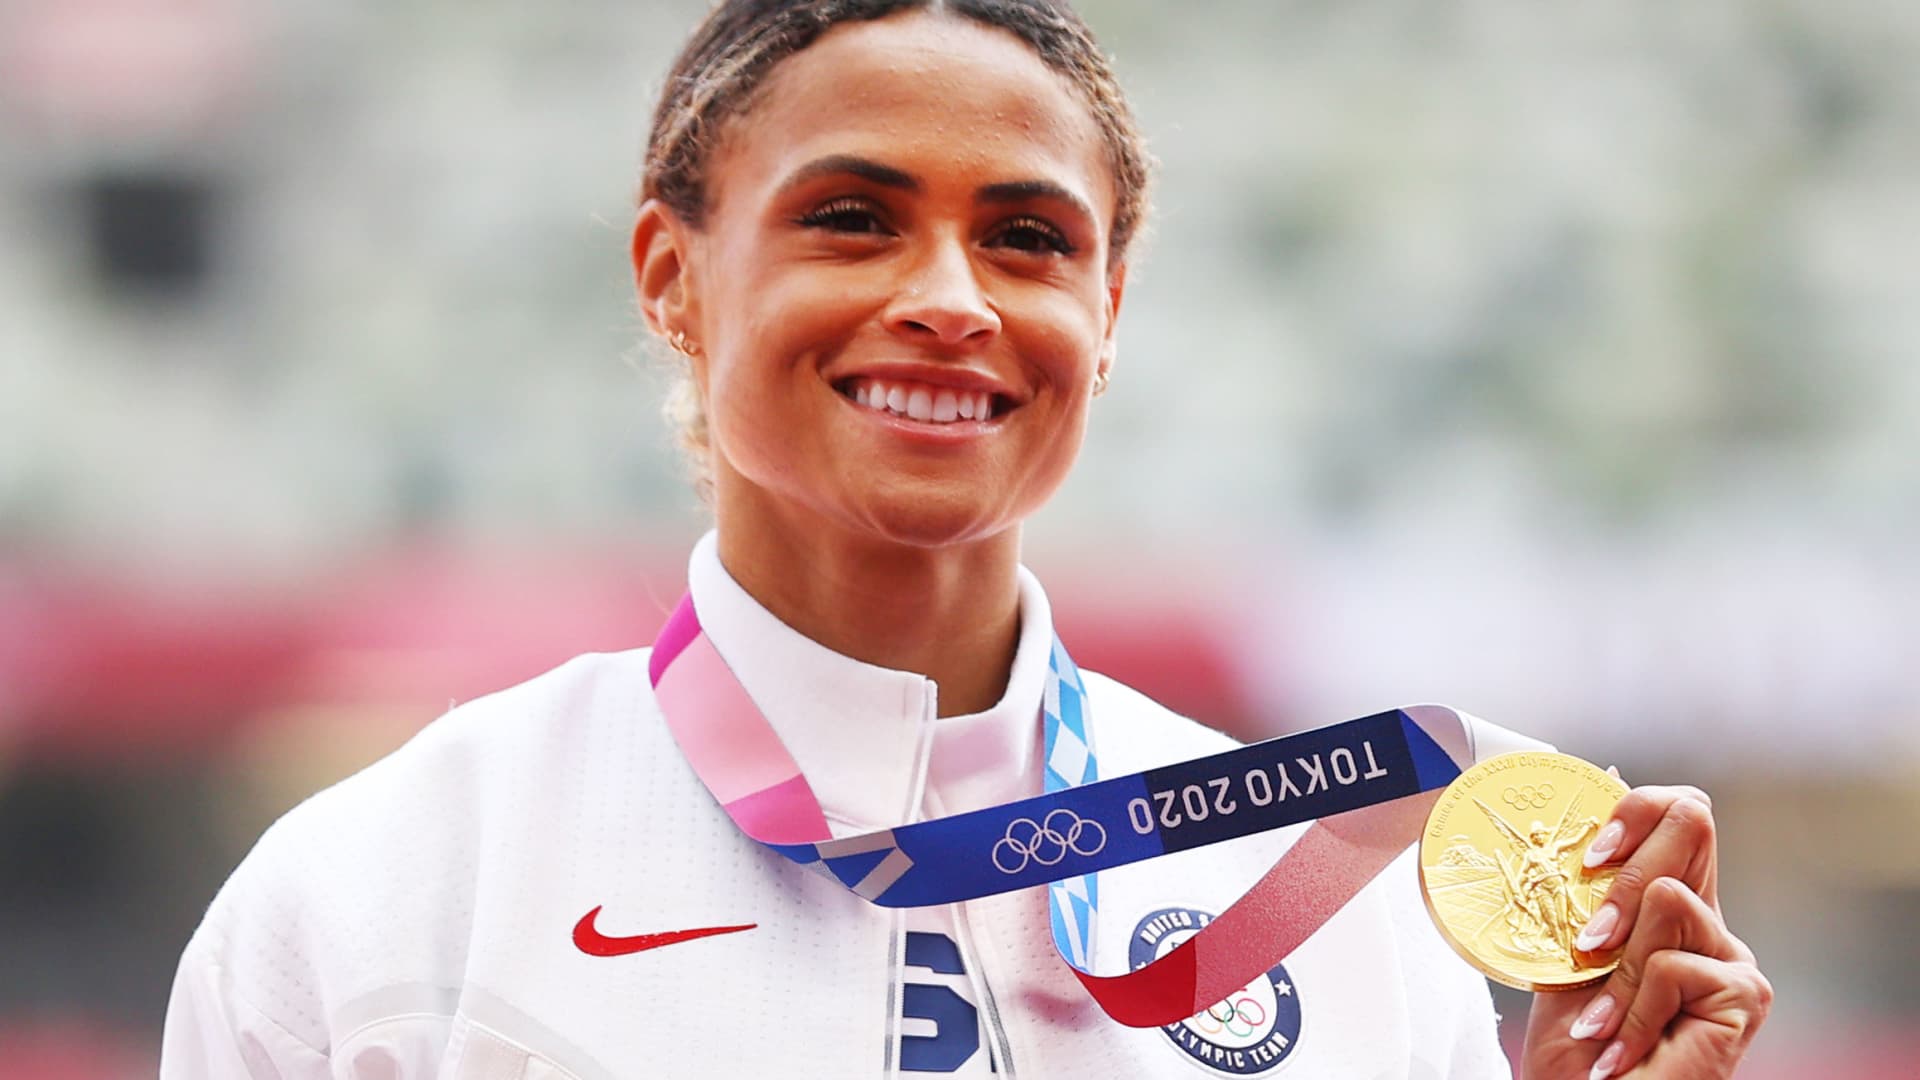 Sydney McLaughlin of the United States poses with her gold medal for the Women's 400m hurdles, Olympic Stadium, Tokyo, Japan, August 4, 2021.